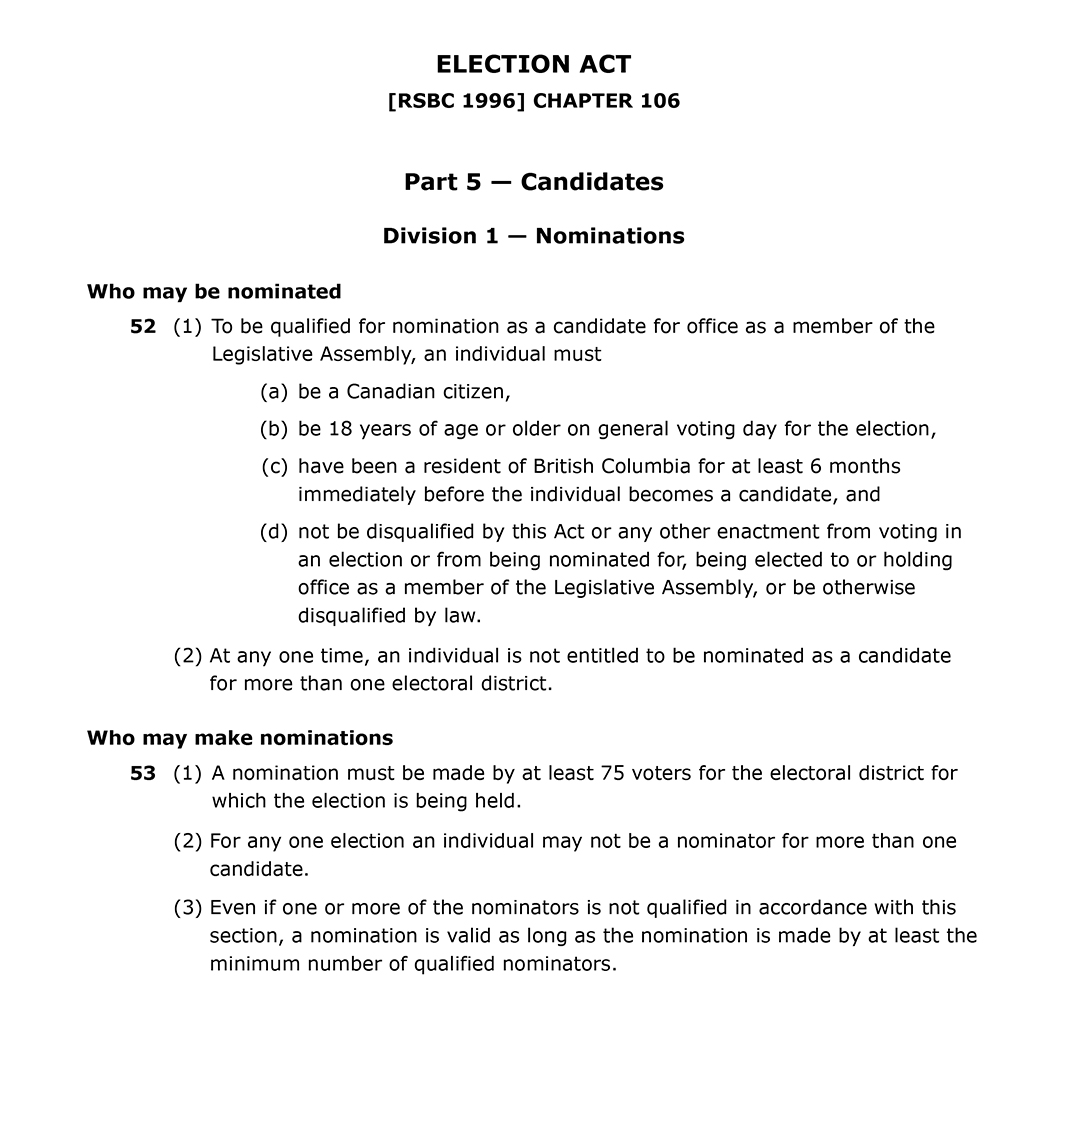 Part 5, Division 1 of the Election Act outlines the qualifications for being nominated to run in a provincial election.